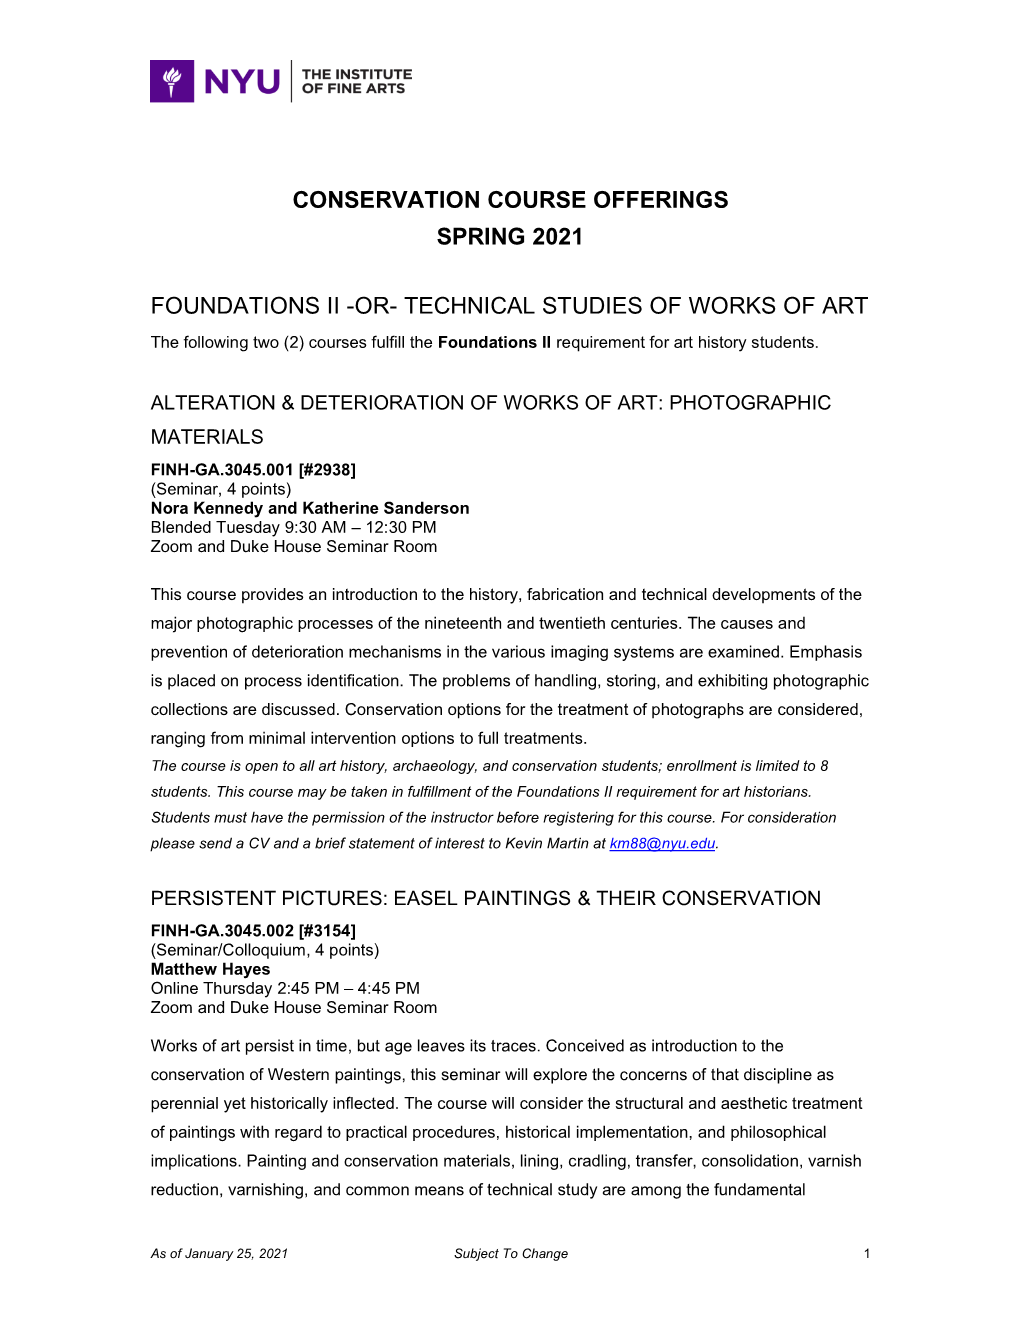 Conservation Course Offerings Spring 2021